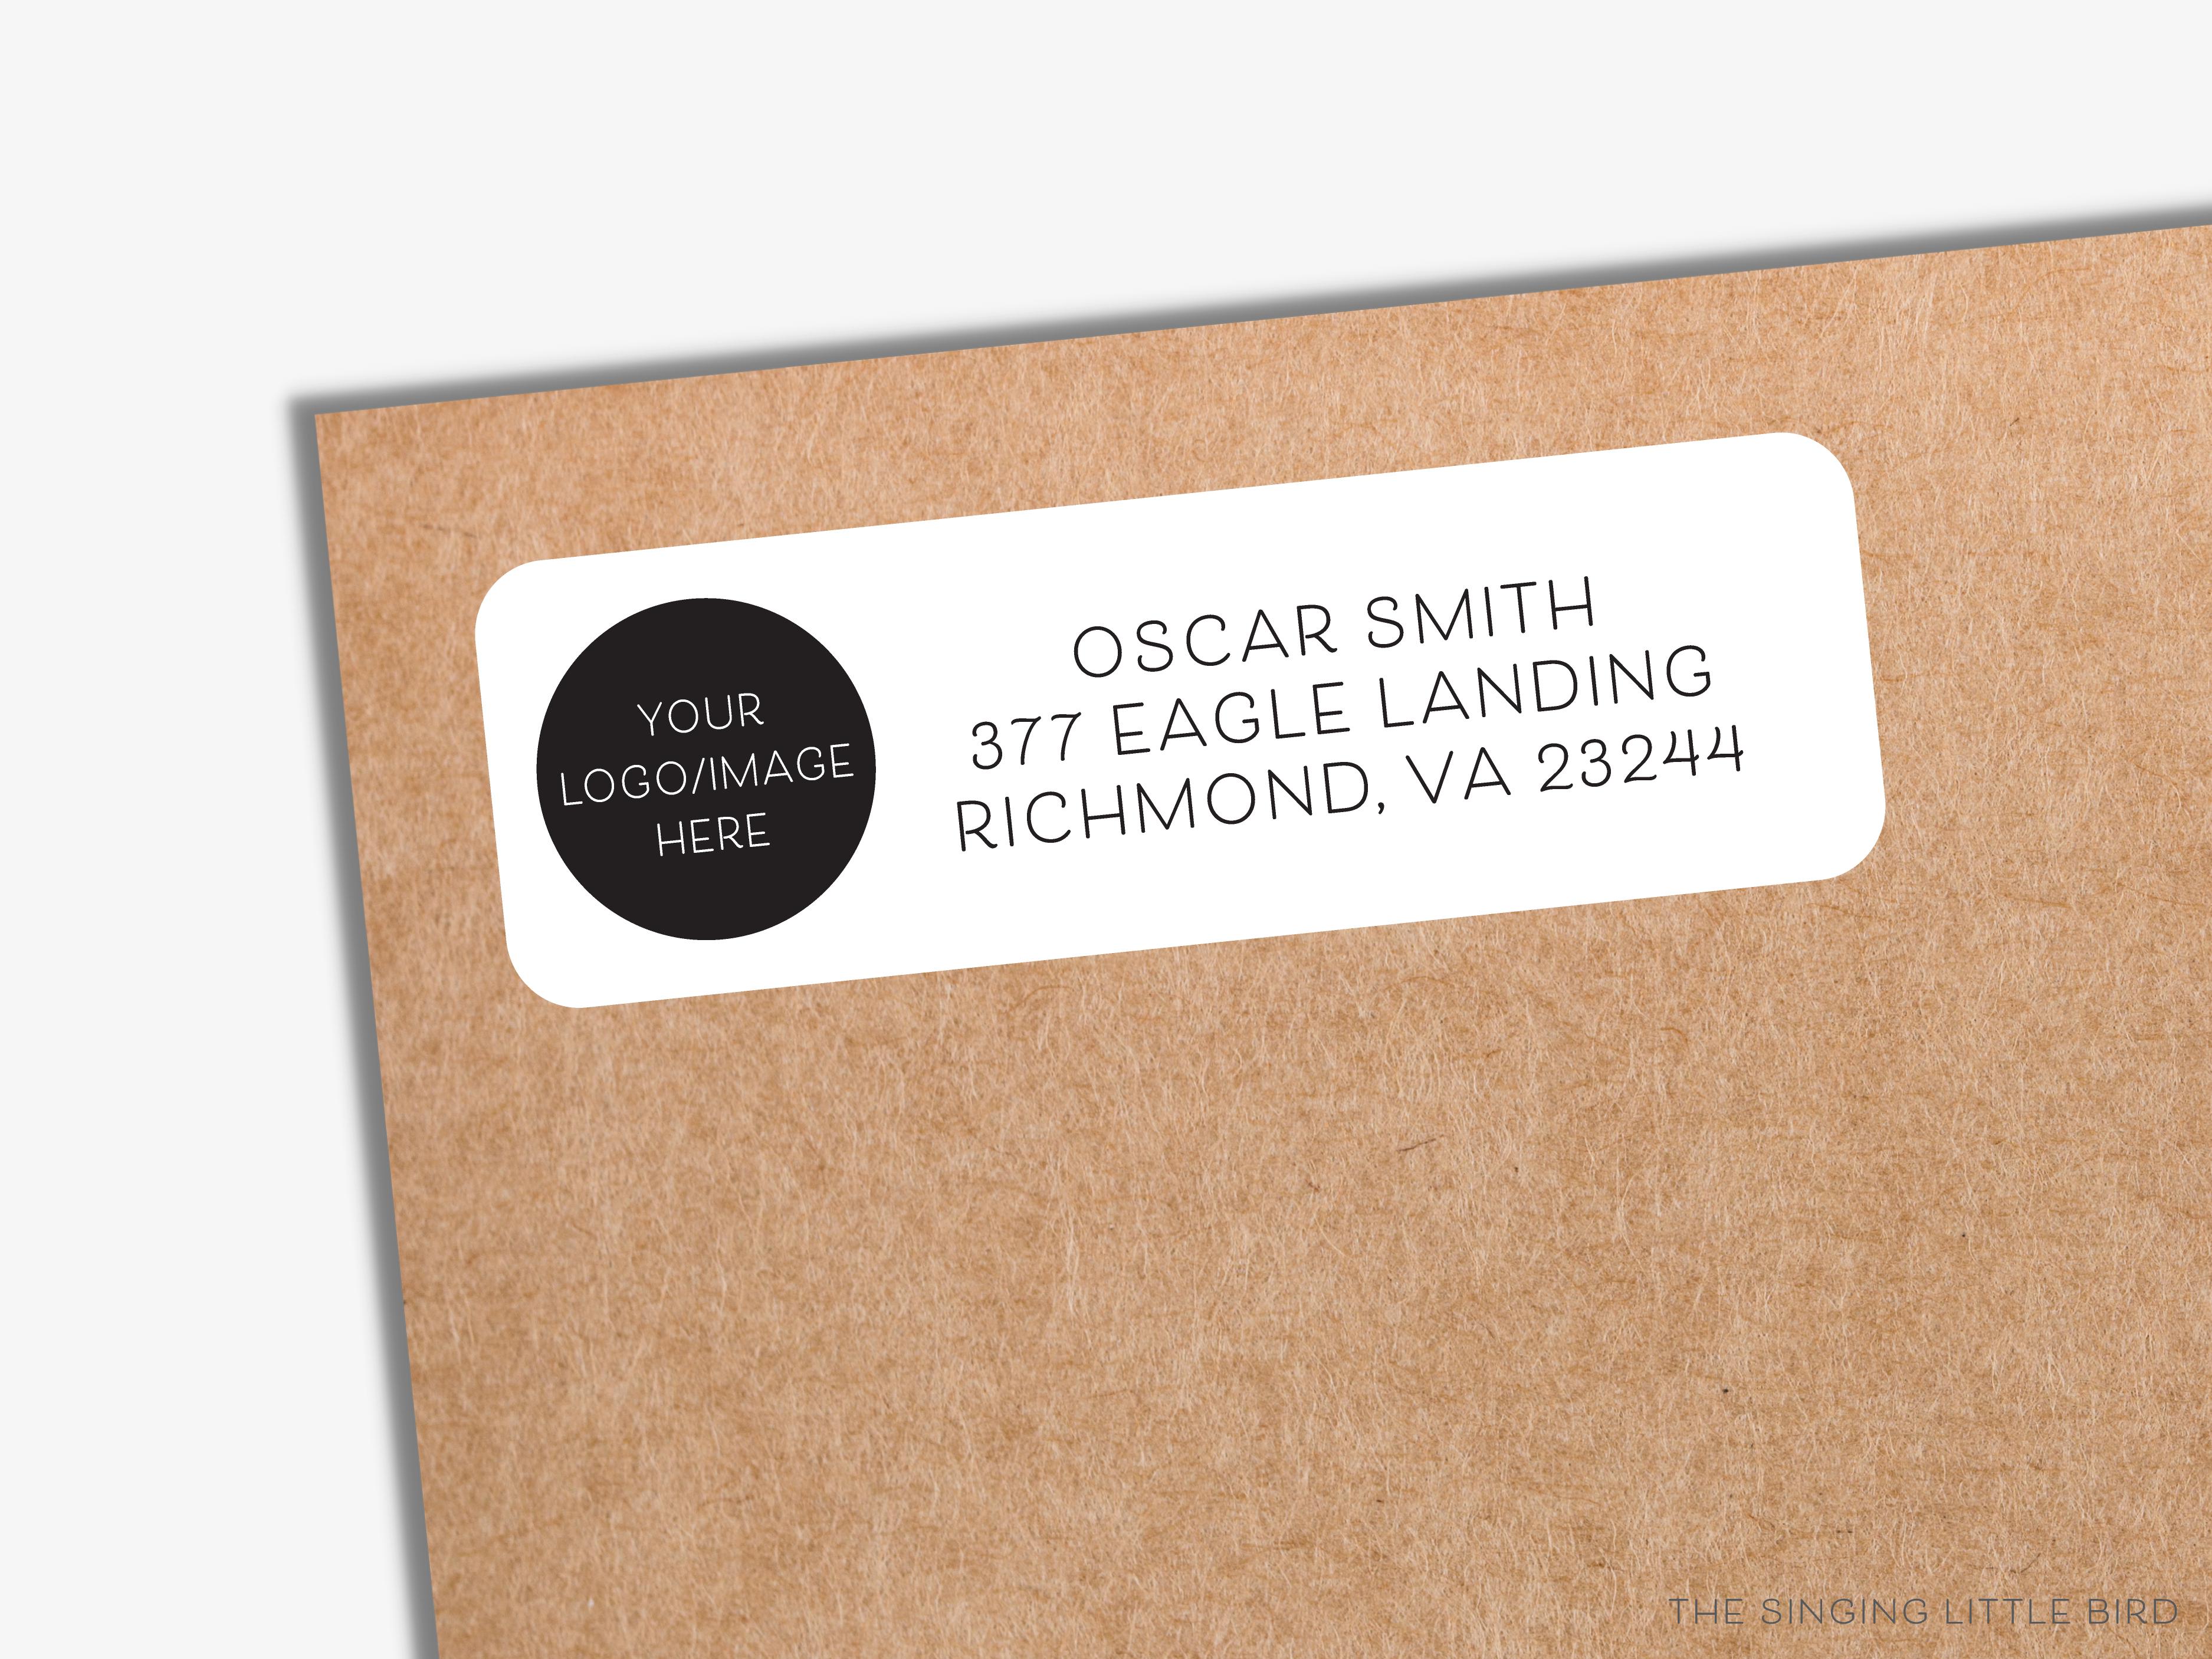 Custom Design Return Address Labels-These personalized return address labels are 2.625" x 1" and feature your custom design or logo, printed in the USA on beautiful matte finish labels. These make great gifts for yourself or your business.-The Singing Little Bird